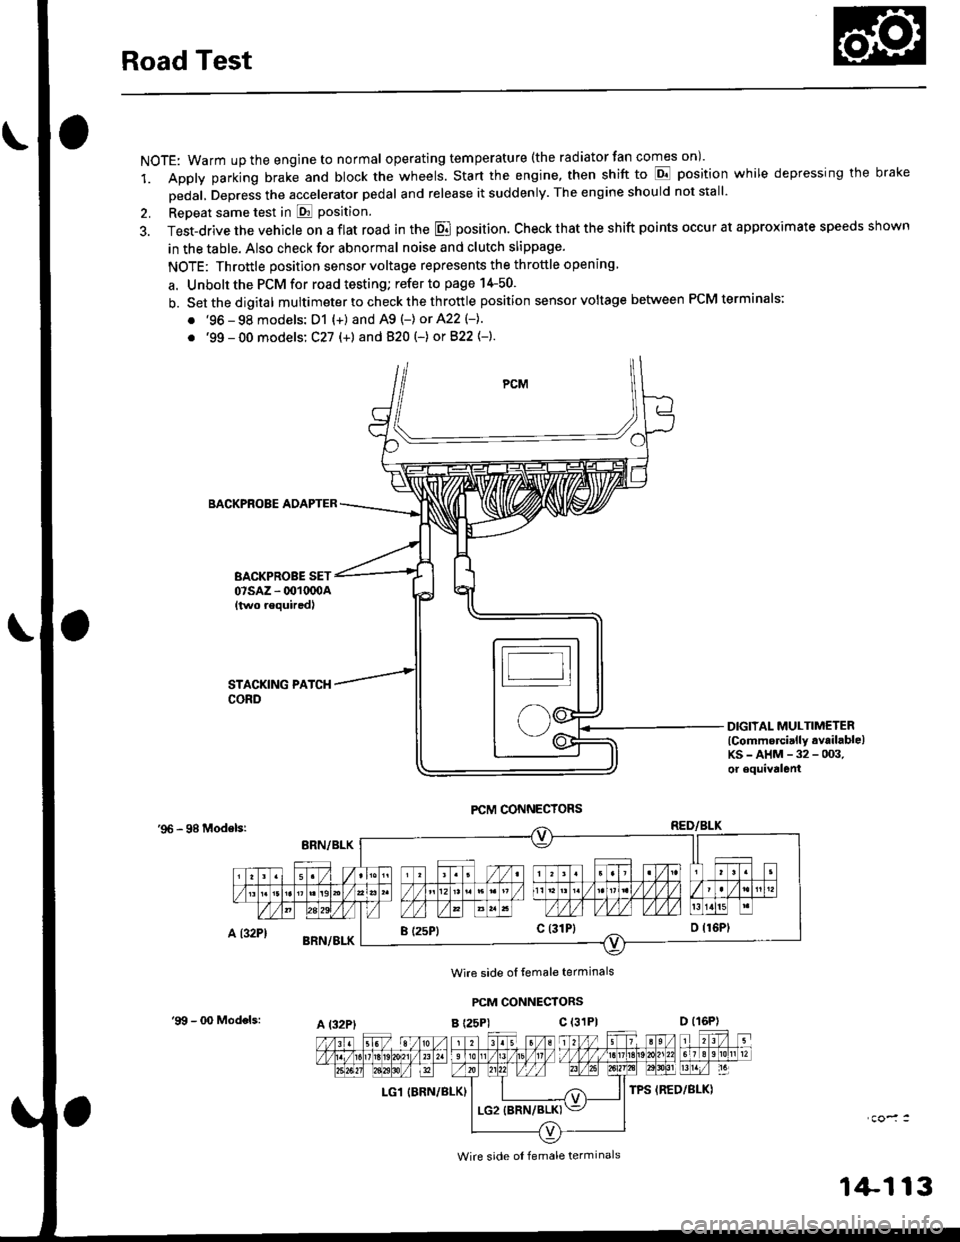 HONDA CIVIC 1999 6.G User Guide Road Test
NOTE: Warm up the engine to normal operating tem peratu re (the rad iator fan comes on )
1. Apply parking brake and block the wheels. Start the engine, then shift to E position while depres